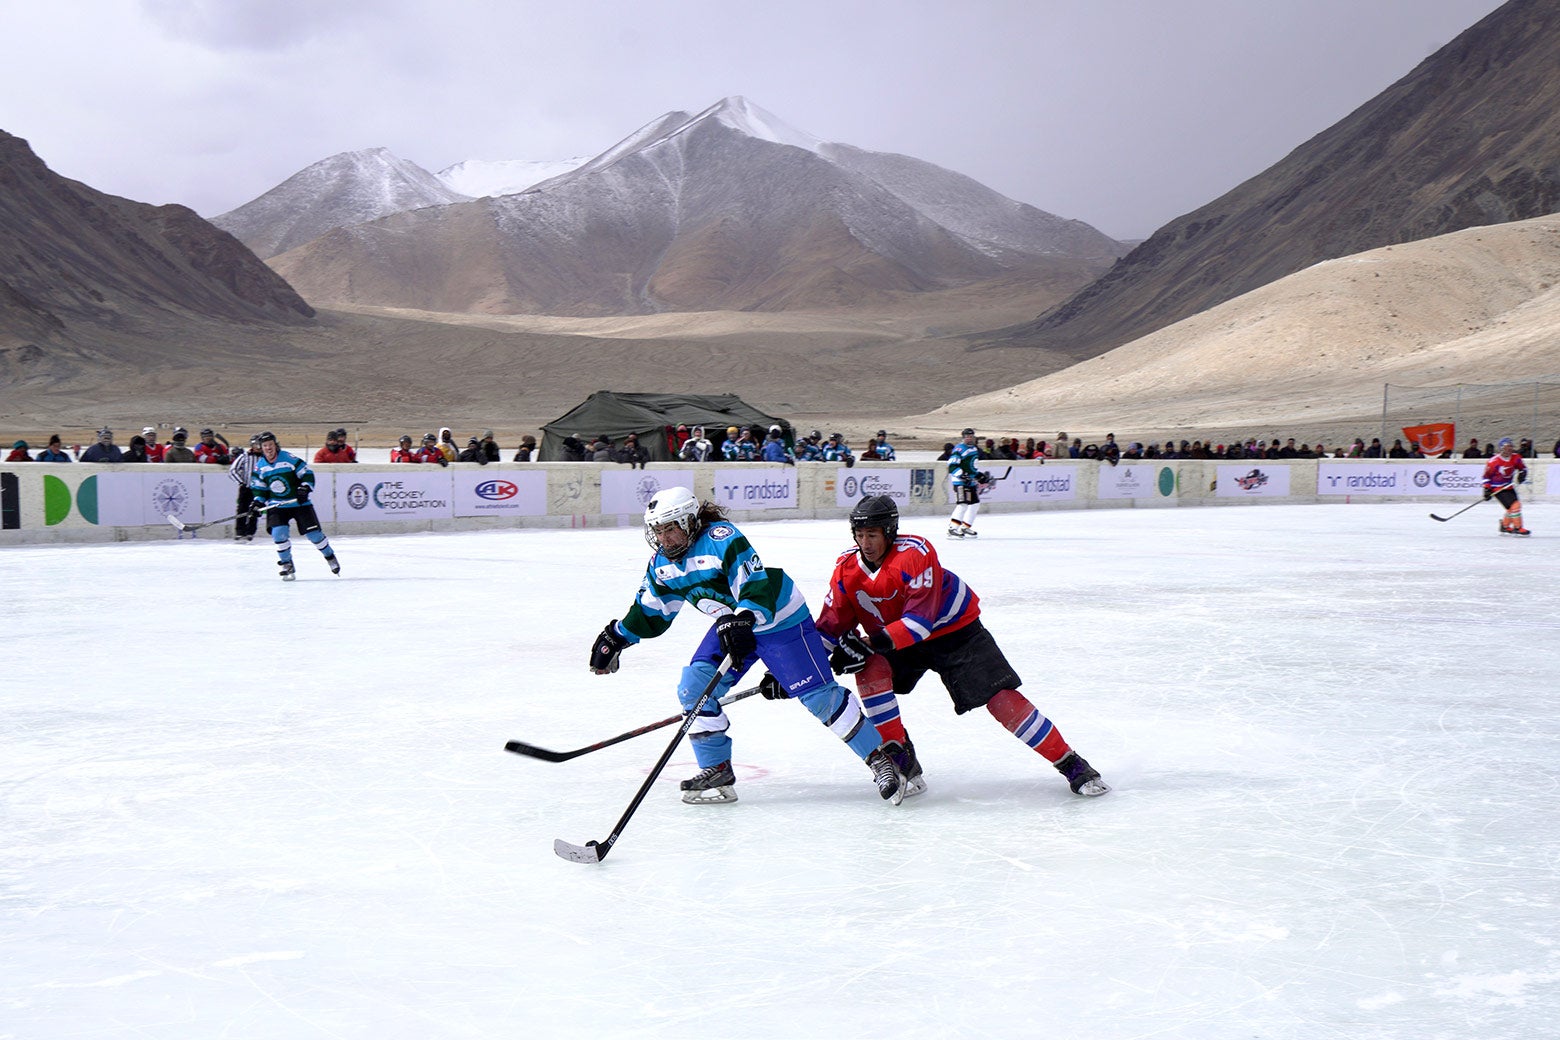 The Himalayas loom over the Olympic-size hockey rink in Chibra Kargyam.